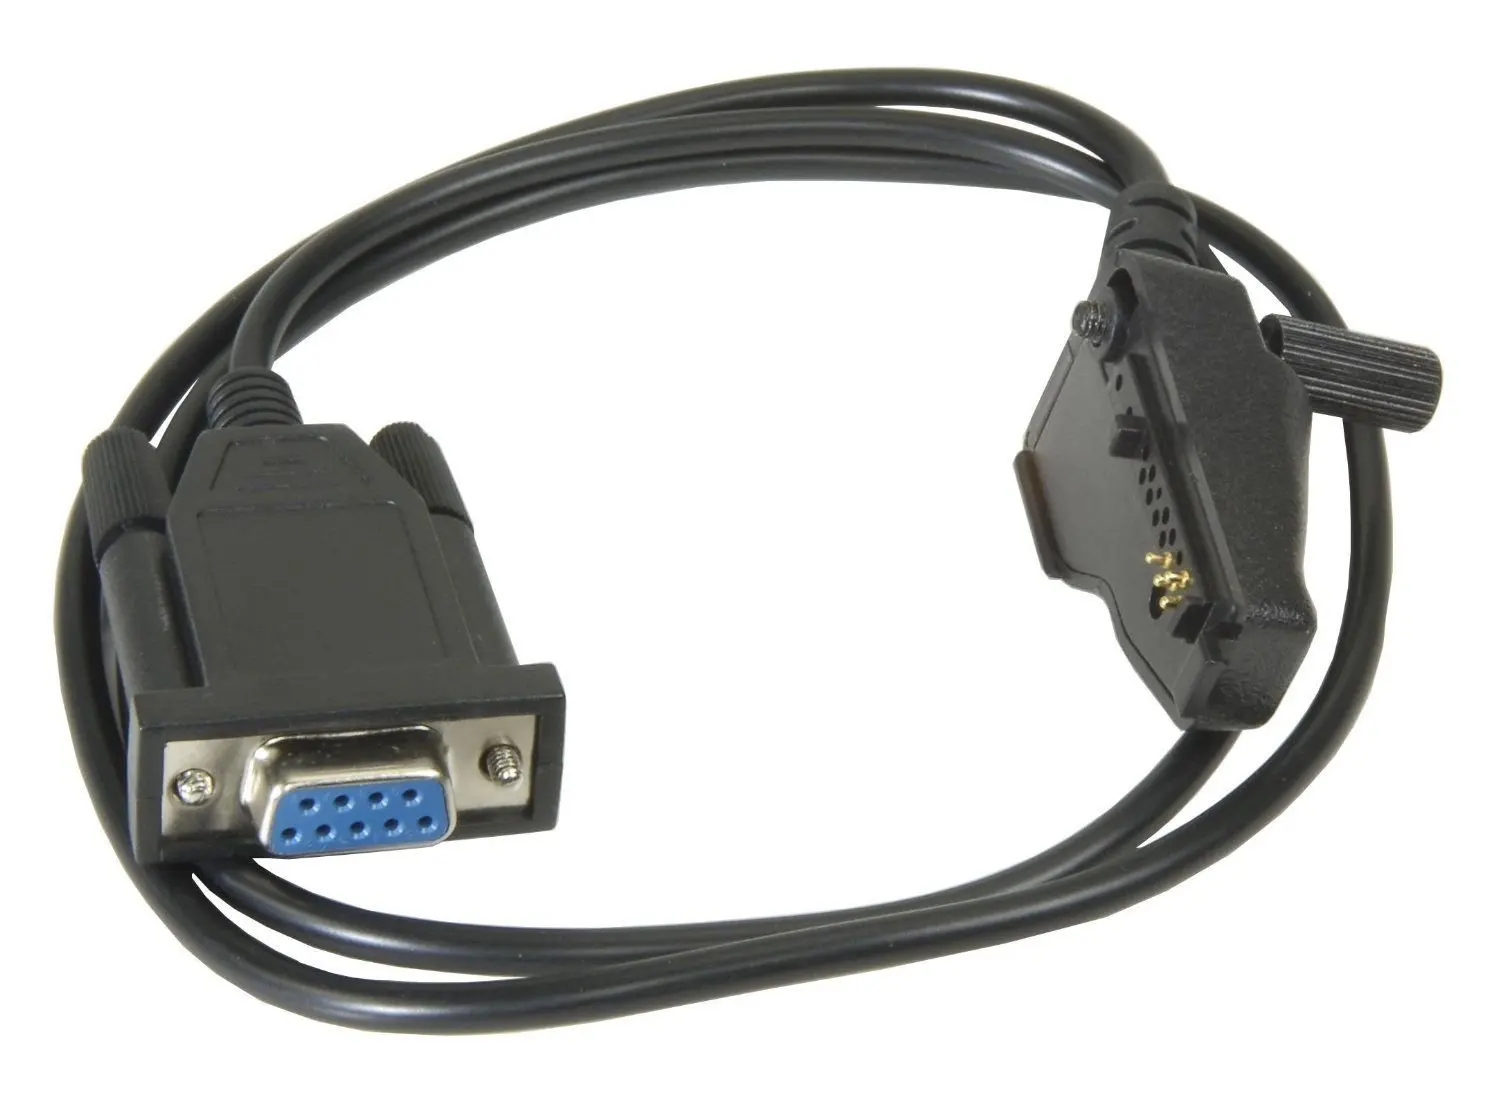 Radio Communication Coaxial Cables & Connectors USB Kenwood Programming Cable KPG36 KPG36p